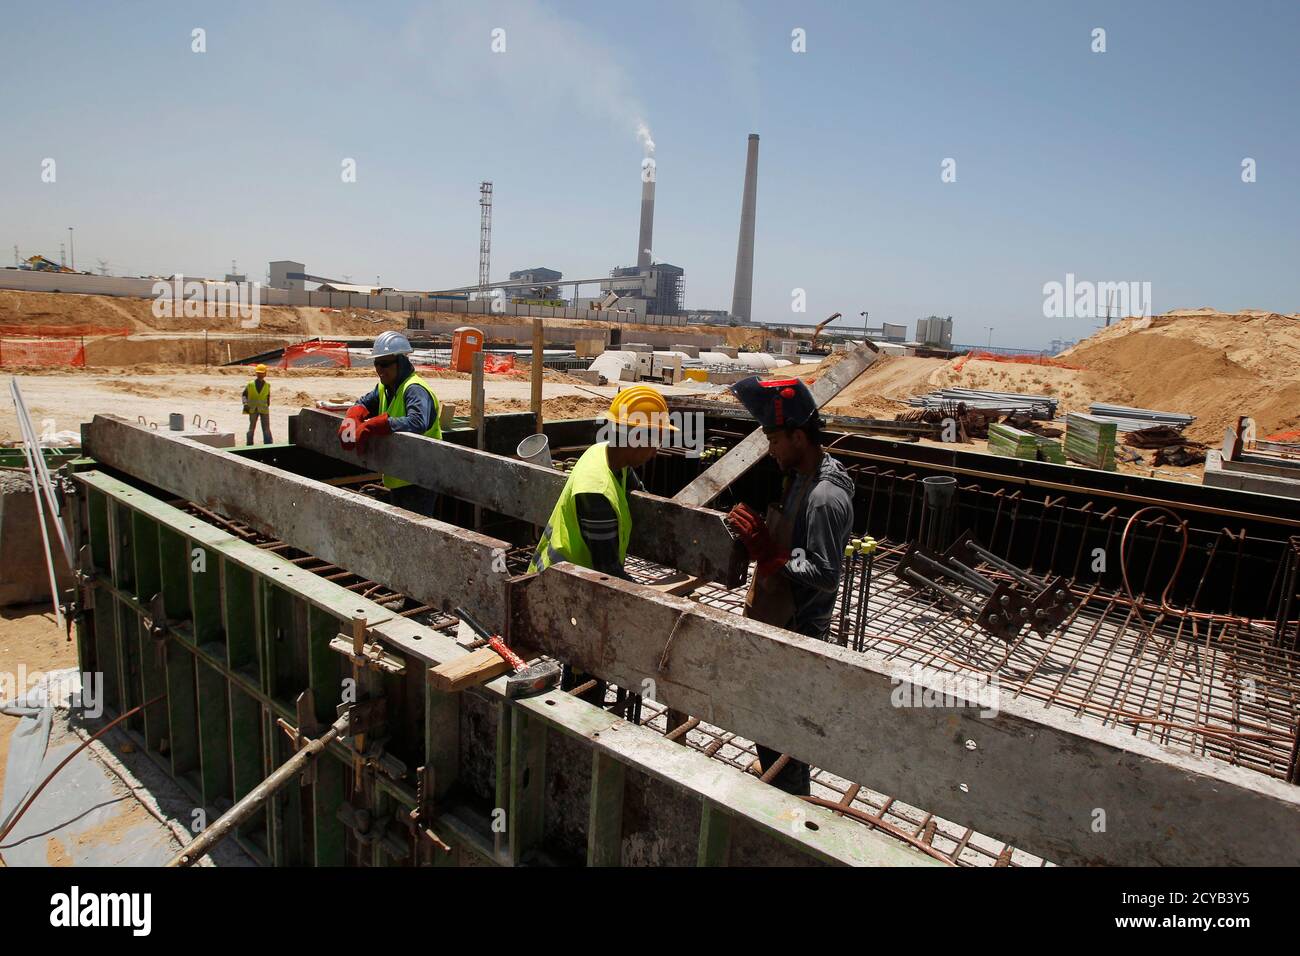 Labourers work at the construction site of Dorad, a private power plant in the southern city of Ashkelon May 17, 2012. Israel Electric Corp (IEC), which is responsible for nearly every aspect of electricity from running power plants to connecting households, simply cannot keep up with growing demand.The state-owned utility just lost natural gas supplies from neighbouring Egypt and fuel costs are soaring. Reserves are low and capacity insufficient and the government, under pressure from massive cost-of-living protests, has limited how much it can charge the public for electricity consumption. P Stock Photo